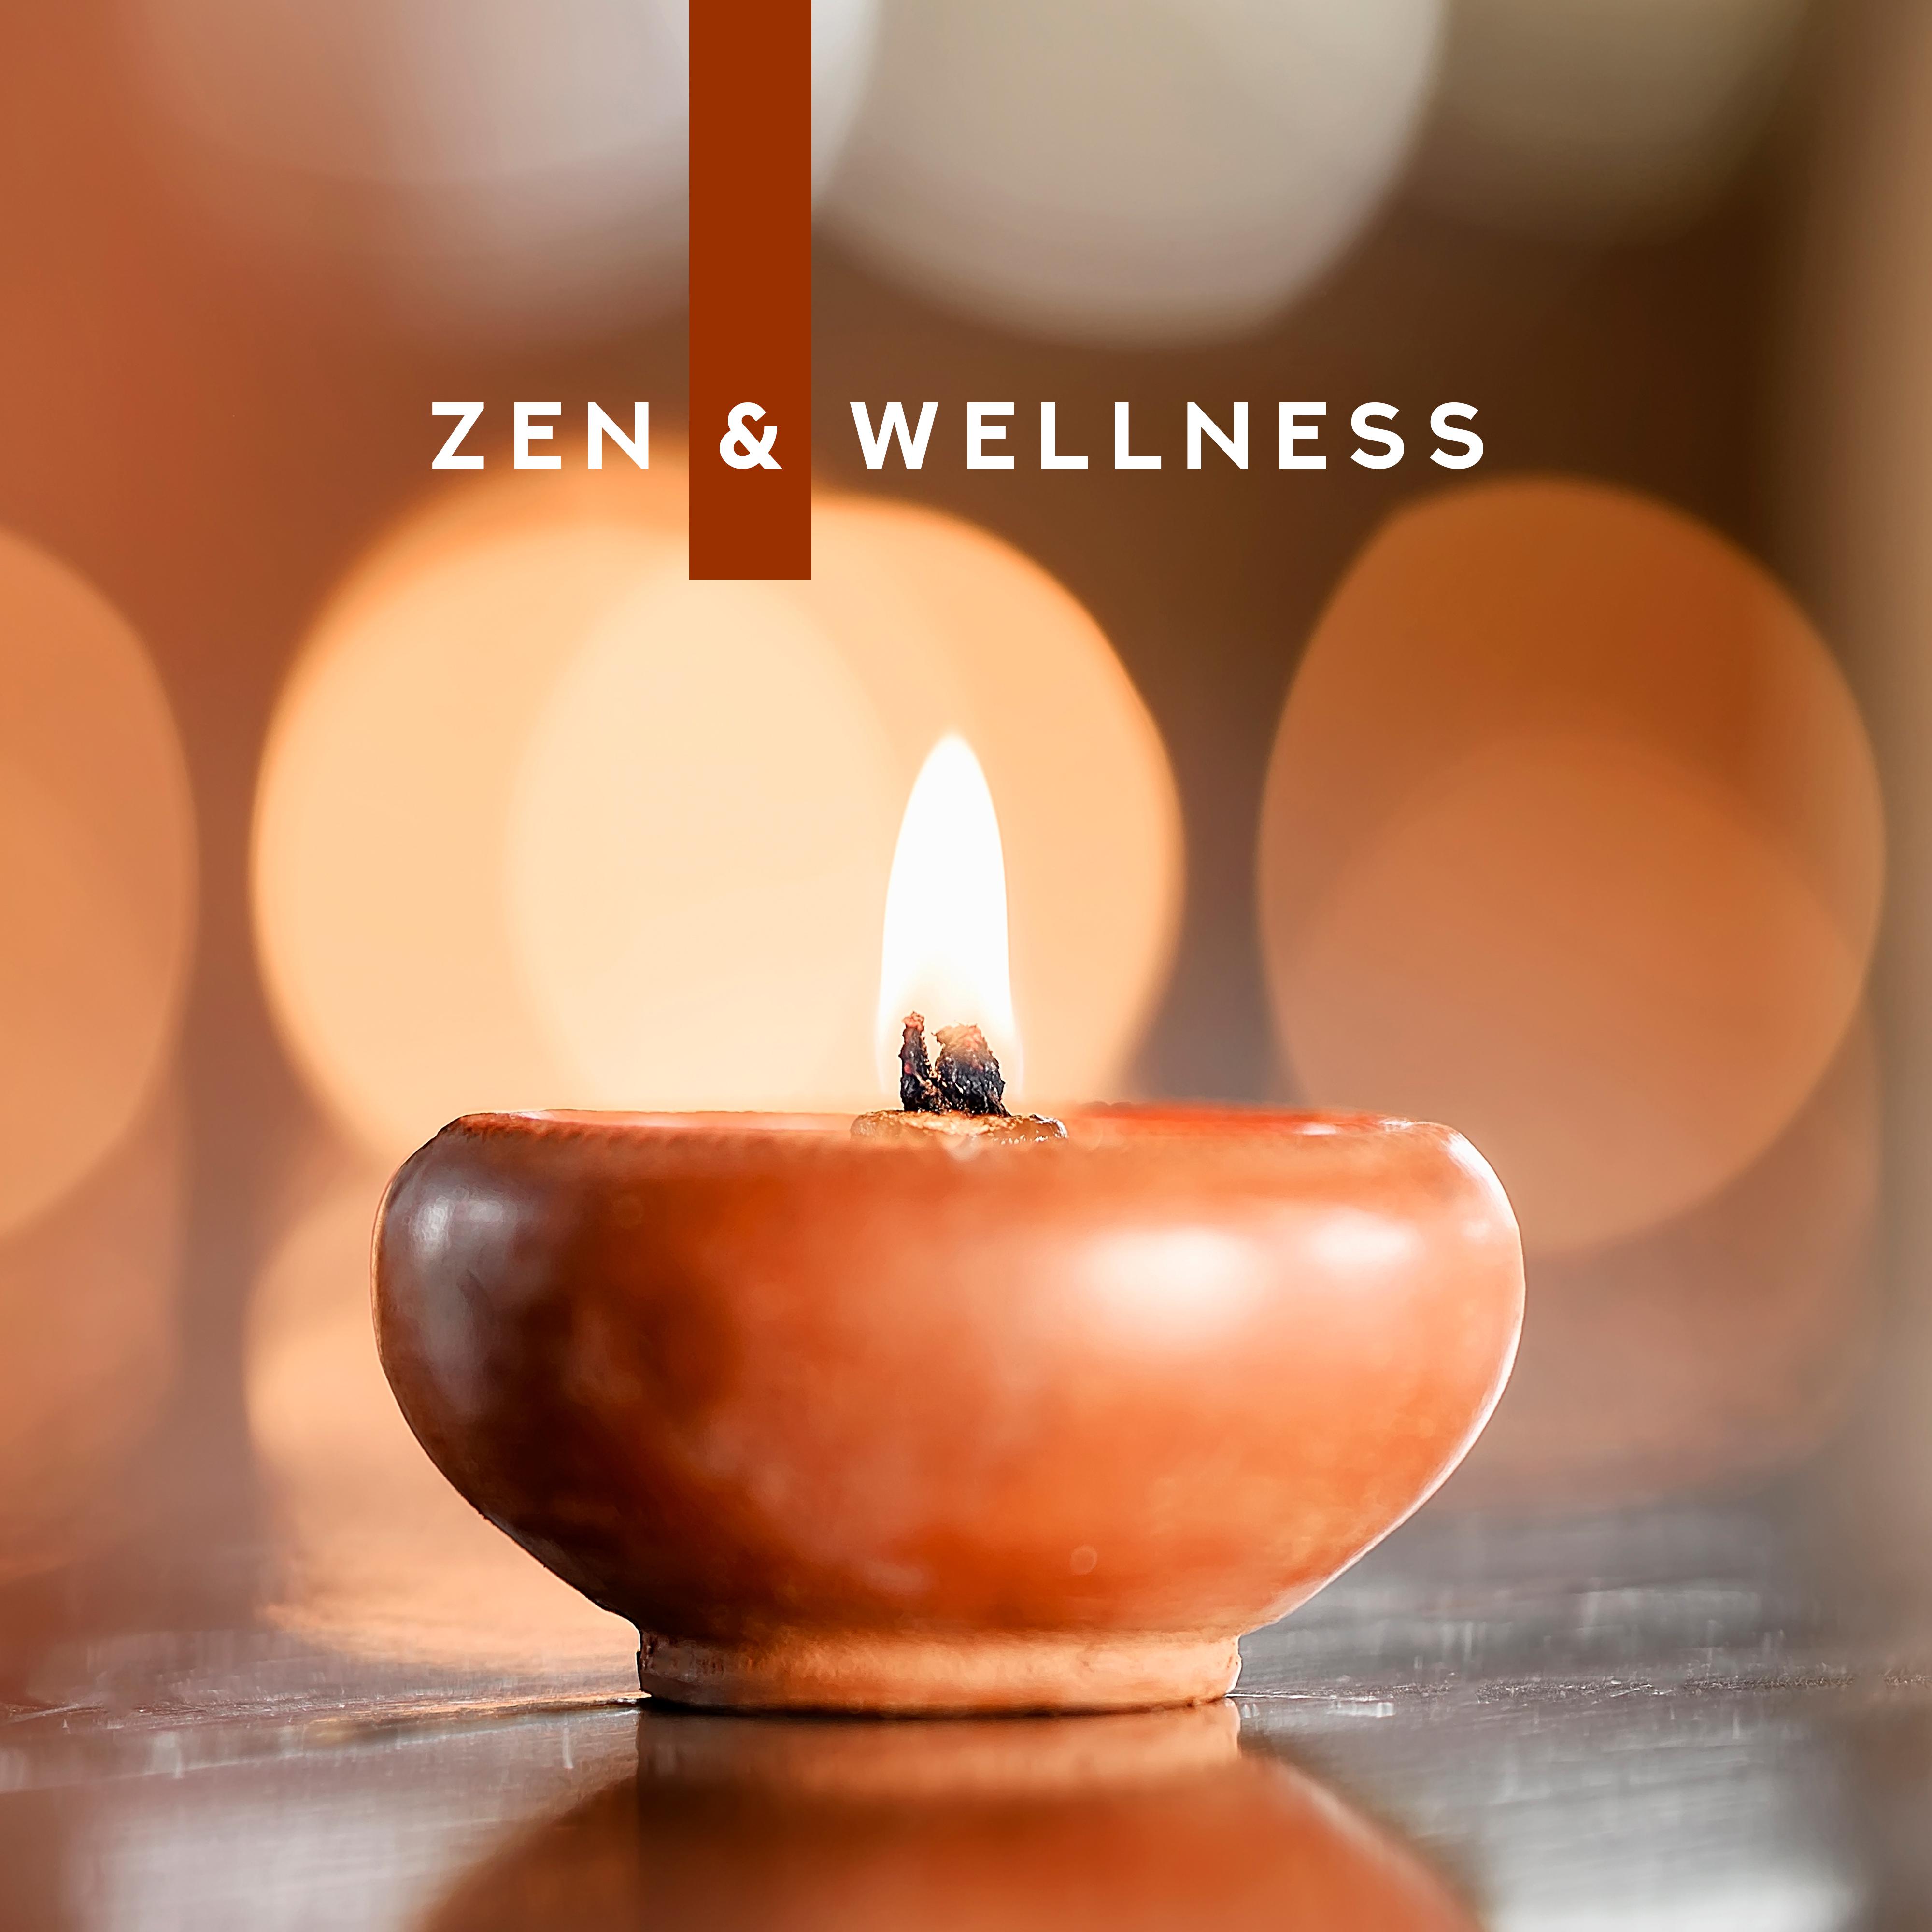 Zen & Wellness: 15 Asian Tracks for Spa, Massage, Relaxation, Beauty, Rejuvenating and Cosmetic Treatments, Bathing and Rest